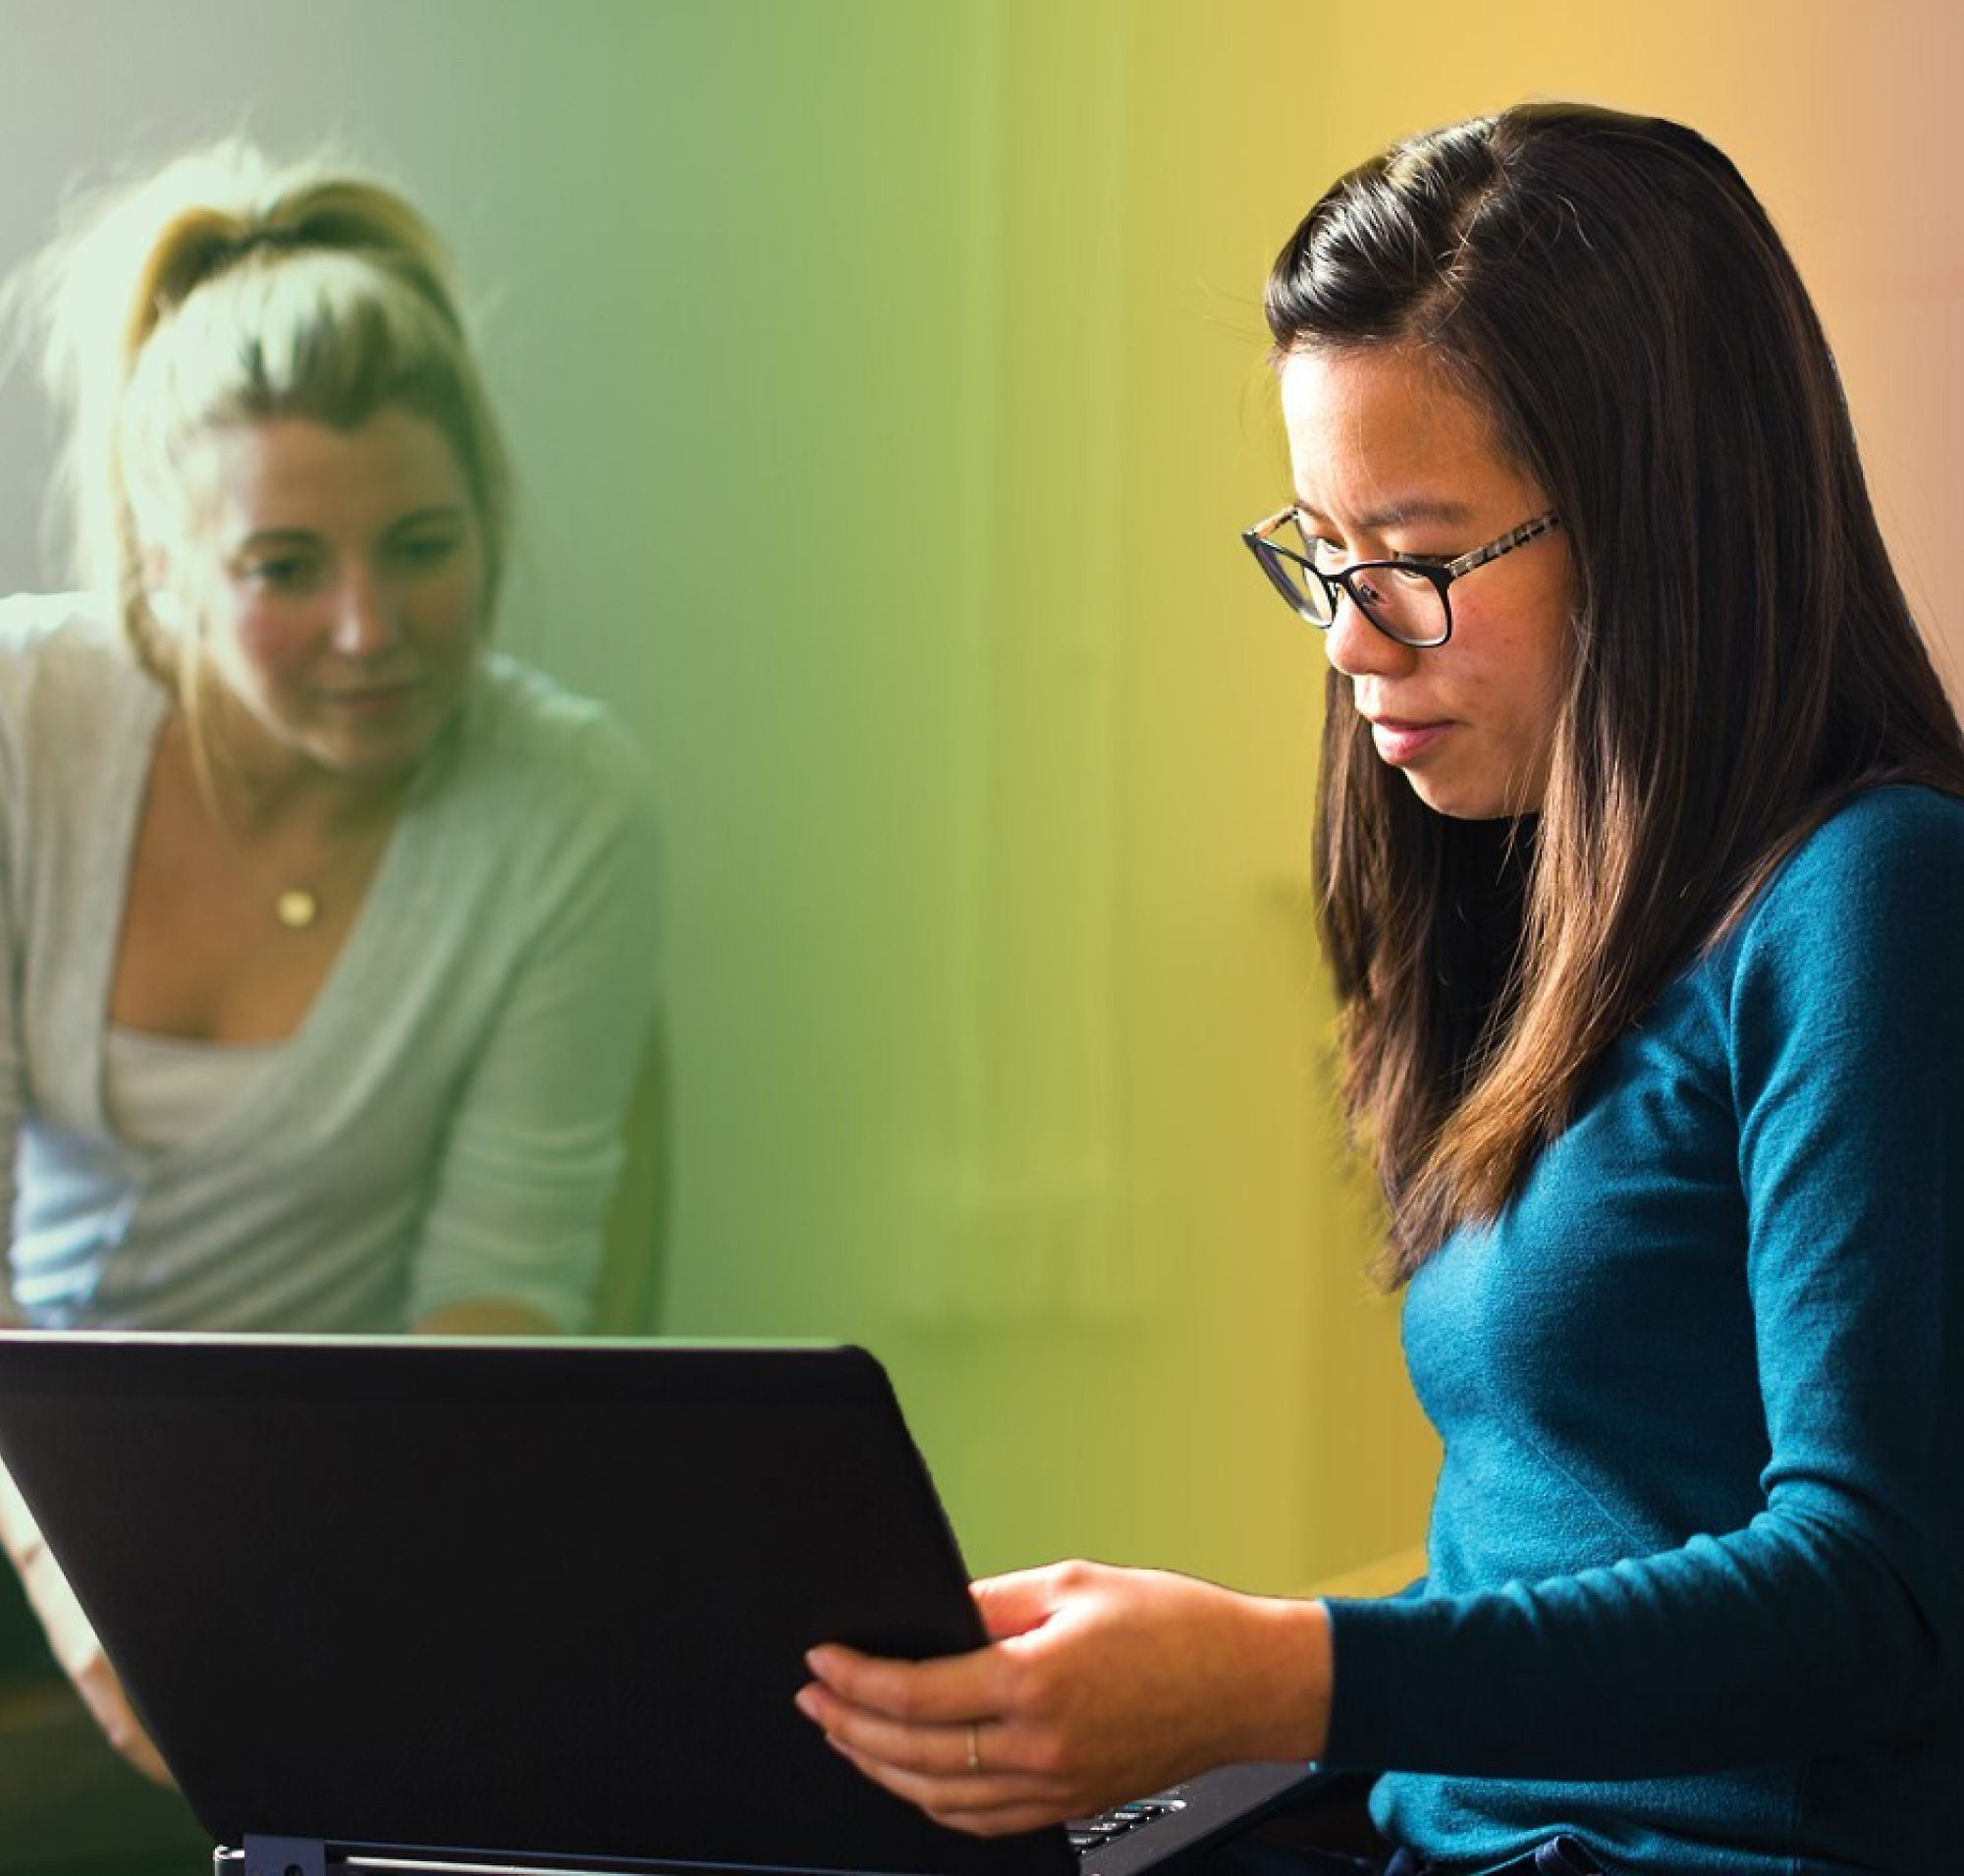 Two women, one with blonde hair and the other with glasses, working together on a laptop in a colorfully lit room.